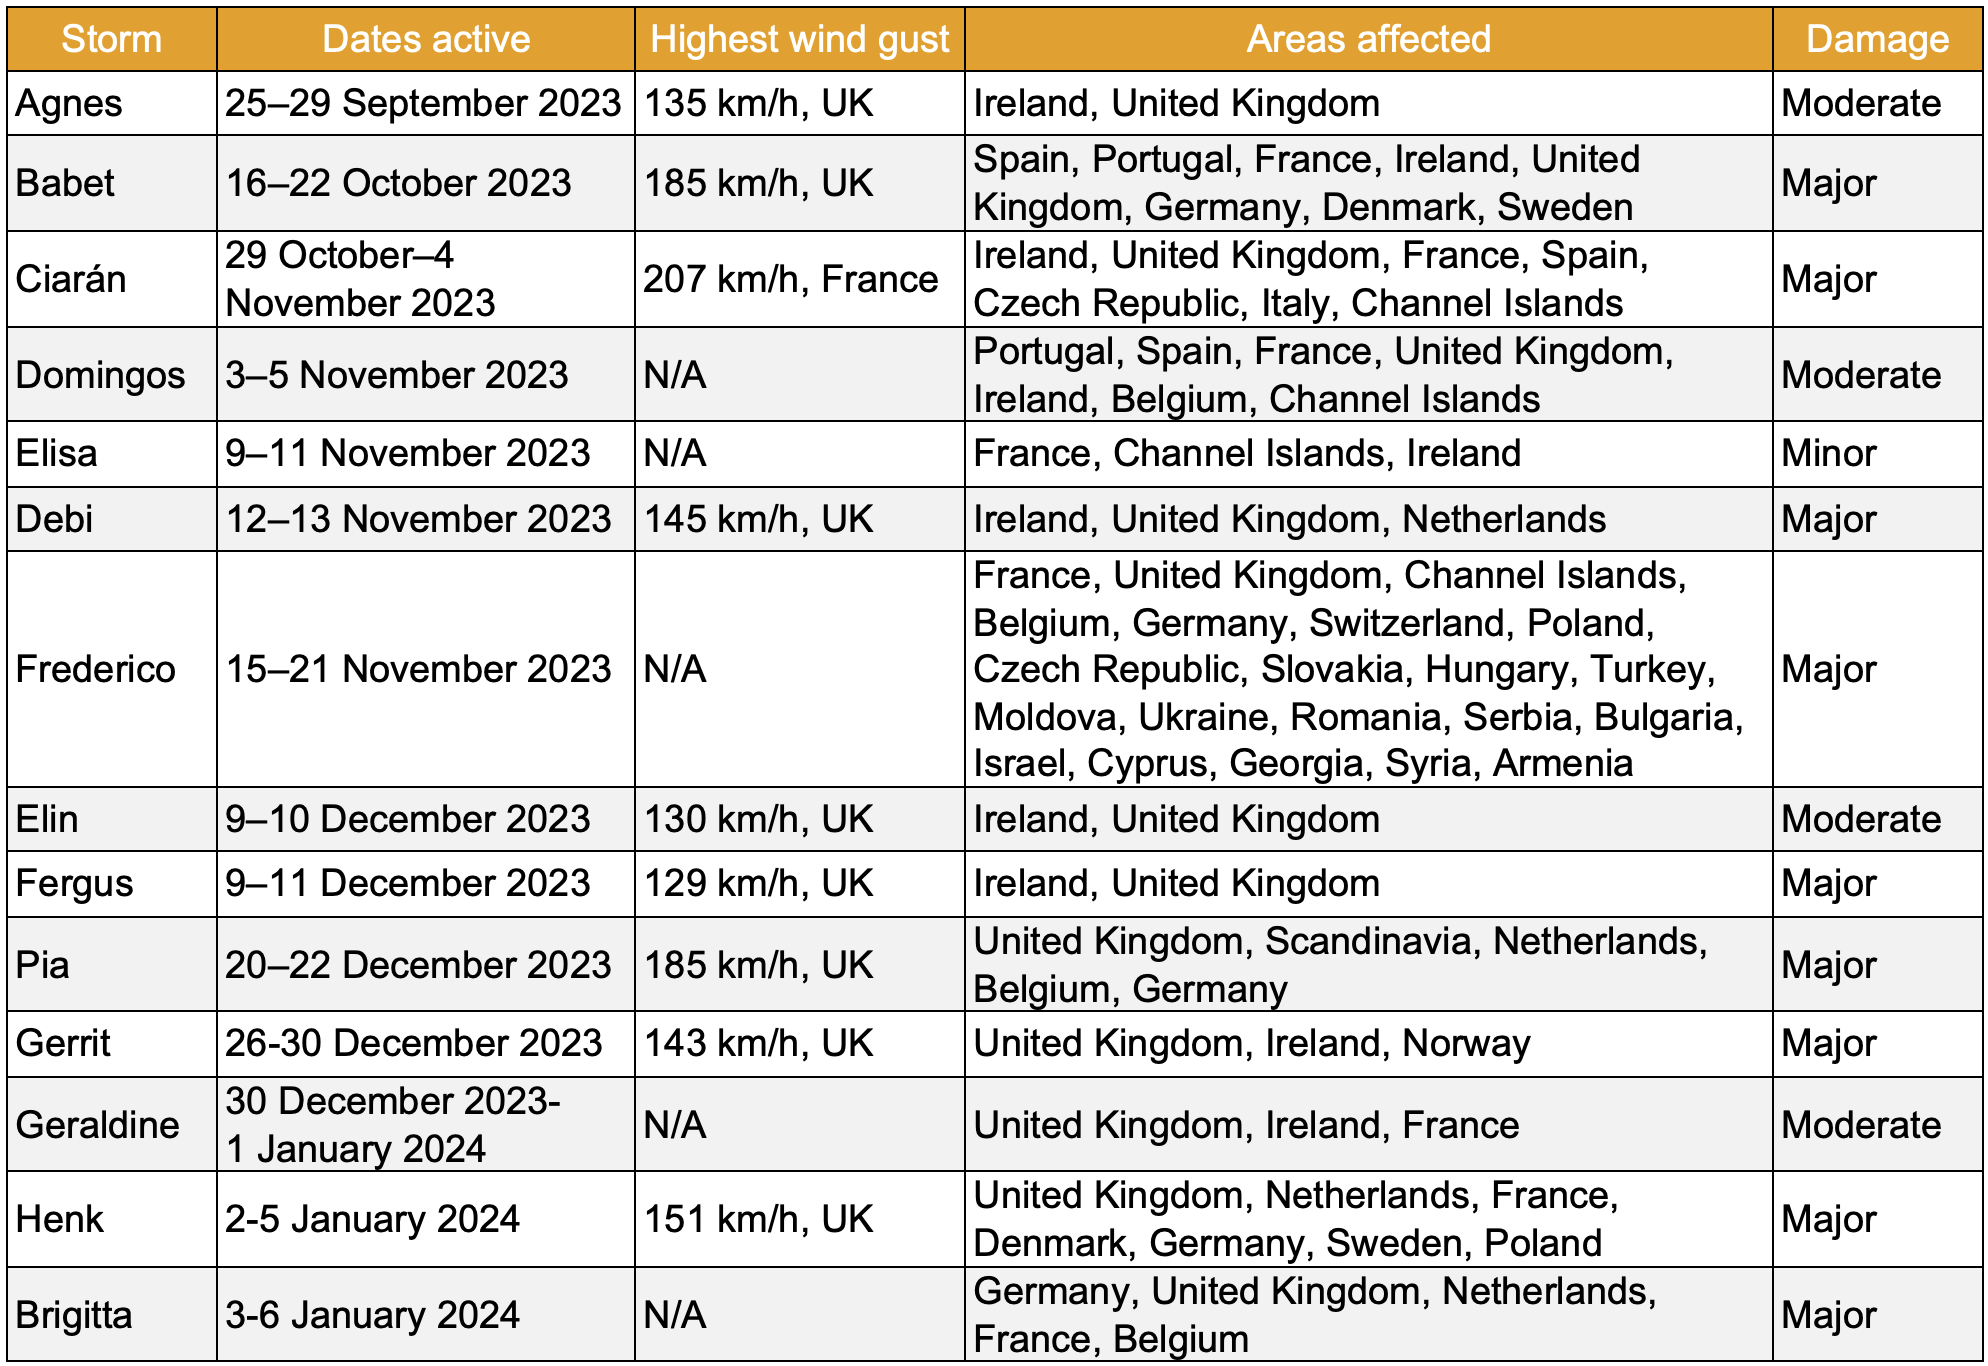 A table with the deatils of storms that affected the UK in 2023/24 winter season